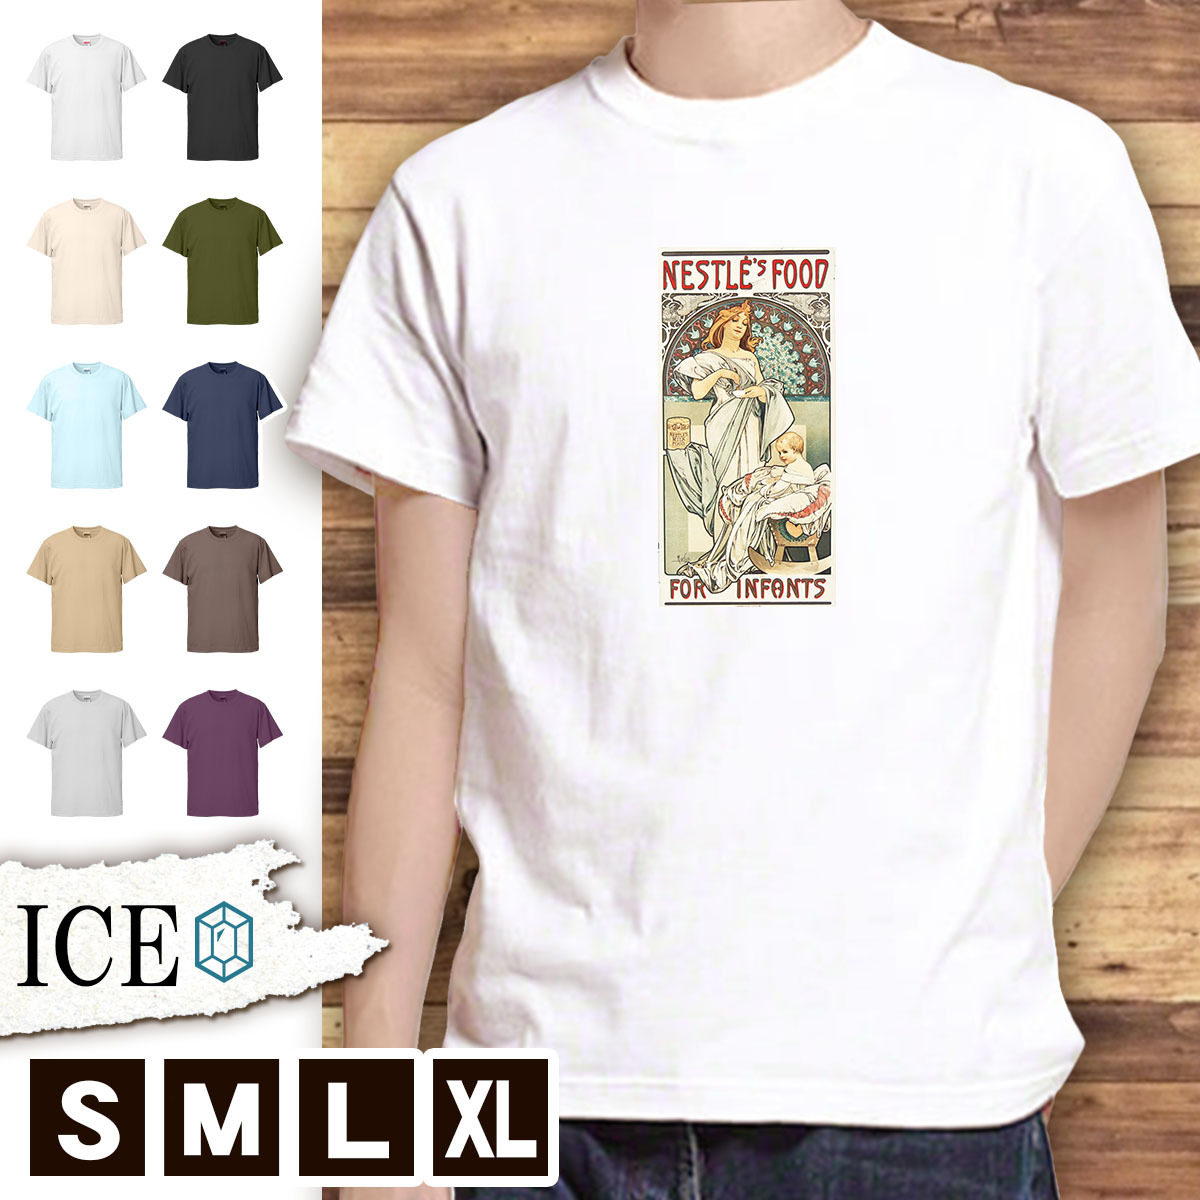  T-shirt aru phone s men's lady's lovely cotton 100%myu car Alfons Maria Mucha picture antique retro large size short sleeves xl